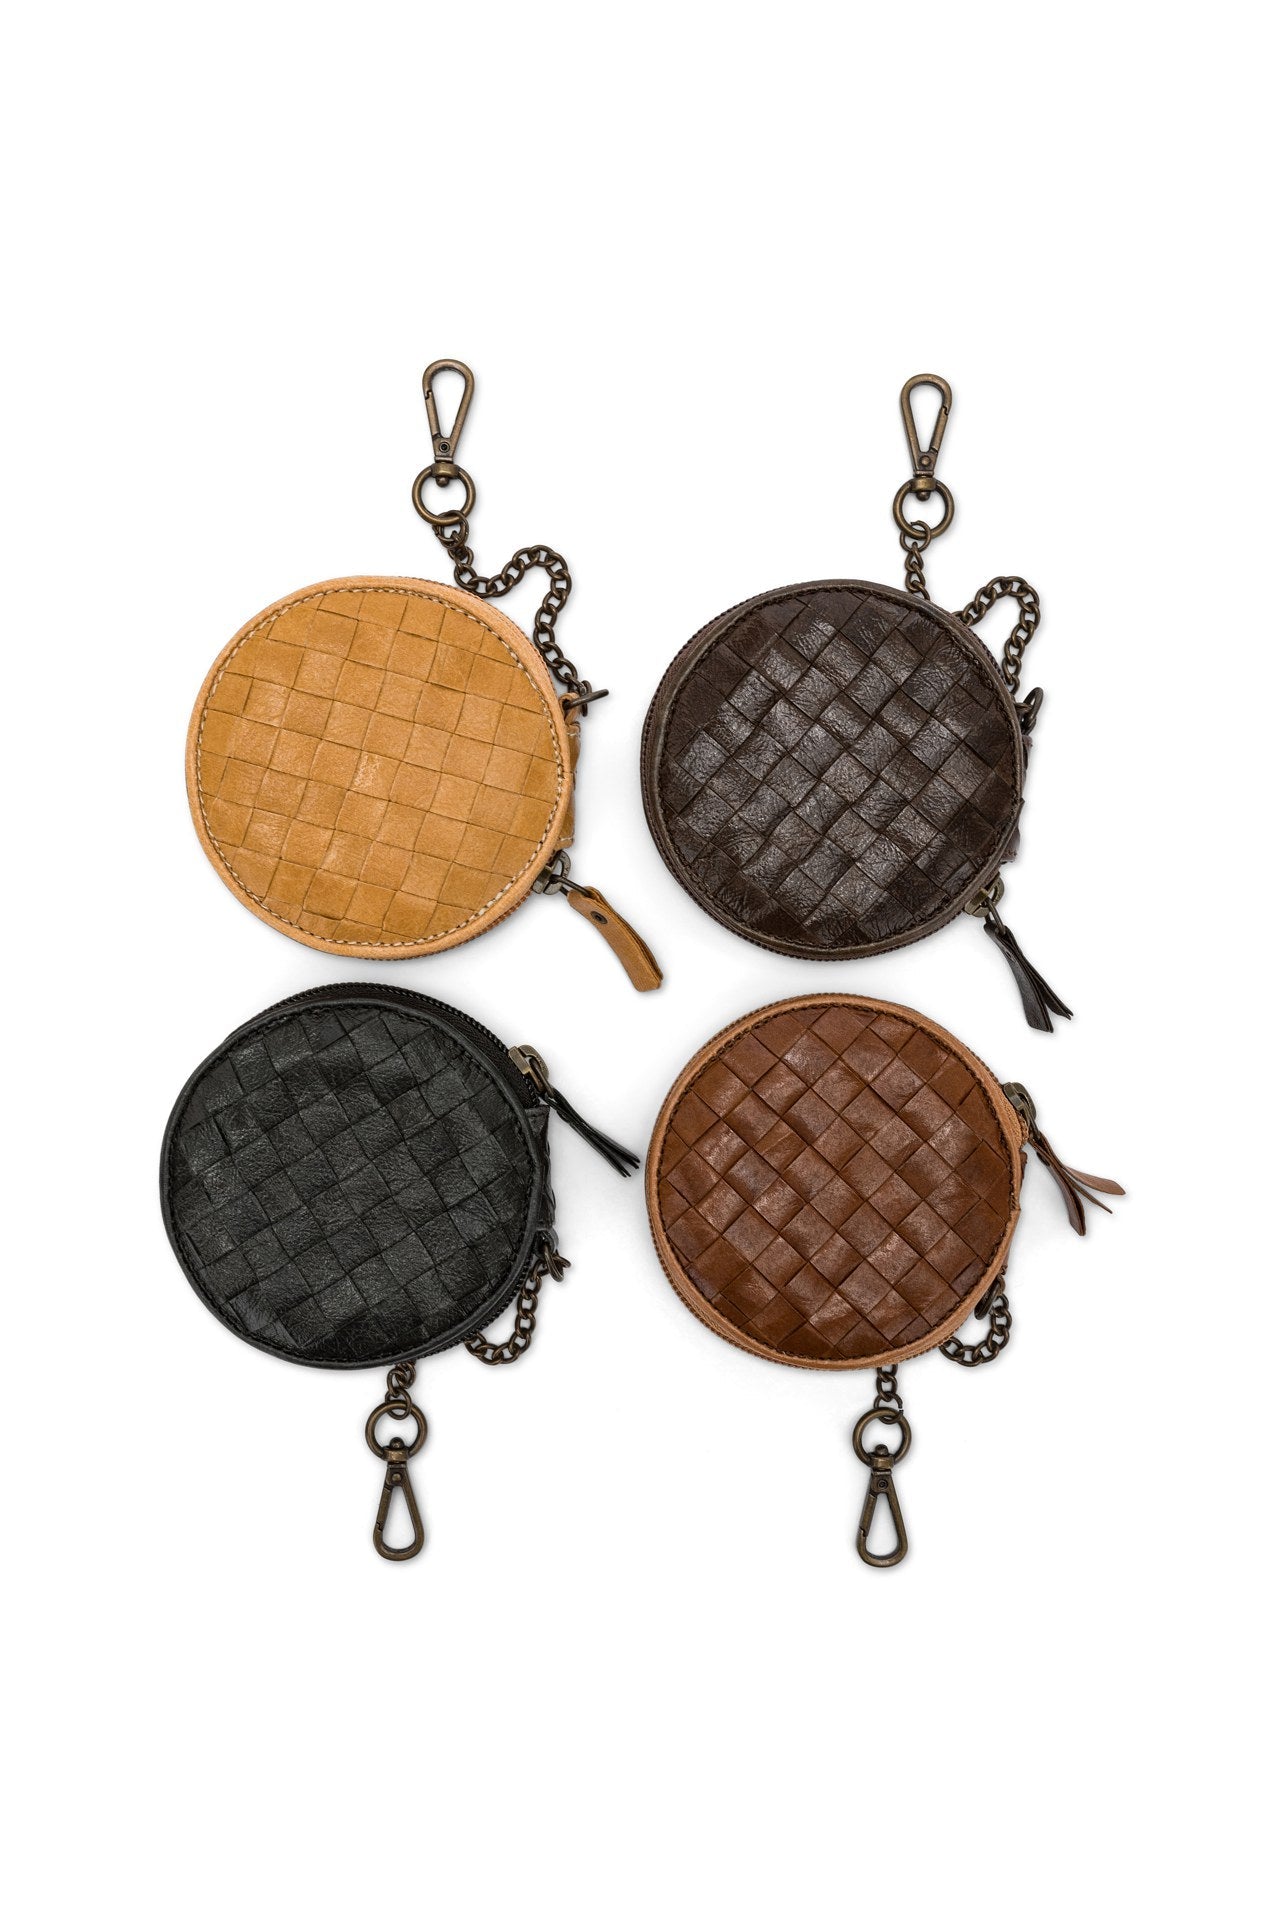 A set of four round washable paper woven round coin purses are shown together in a square on a white background. Clockwise from top left they are tan, chocolate brown, mid brown and black. 